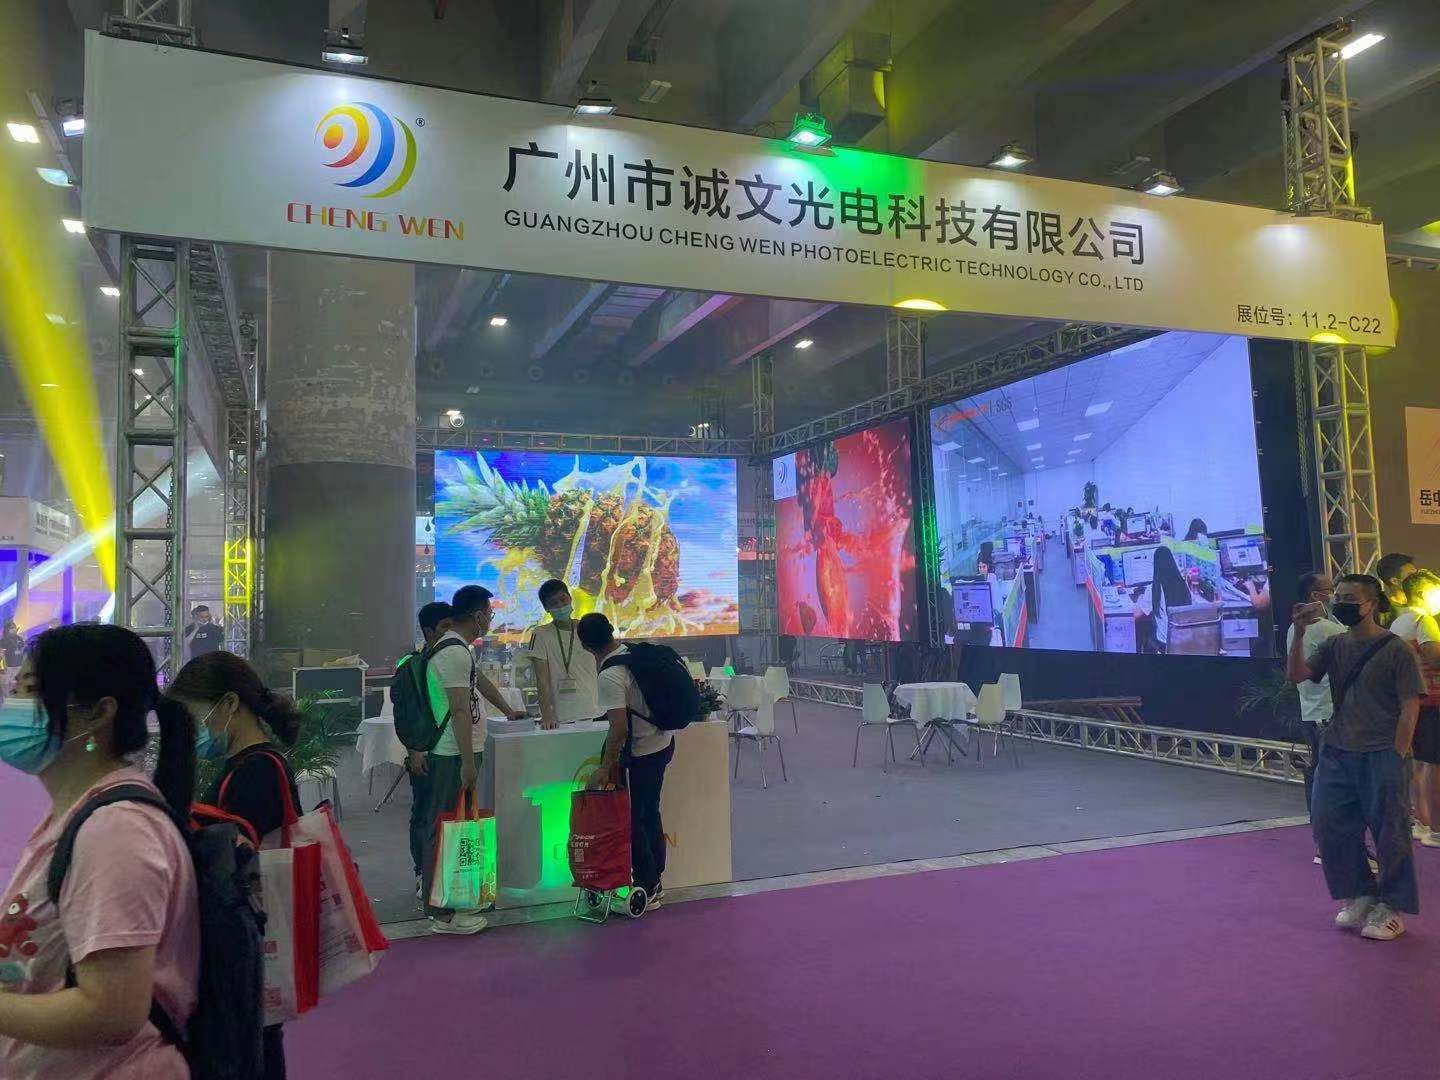 Exhibition led wall display